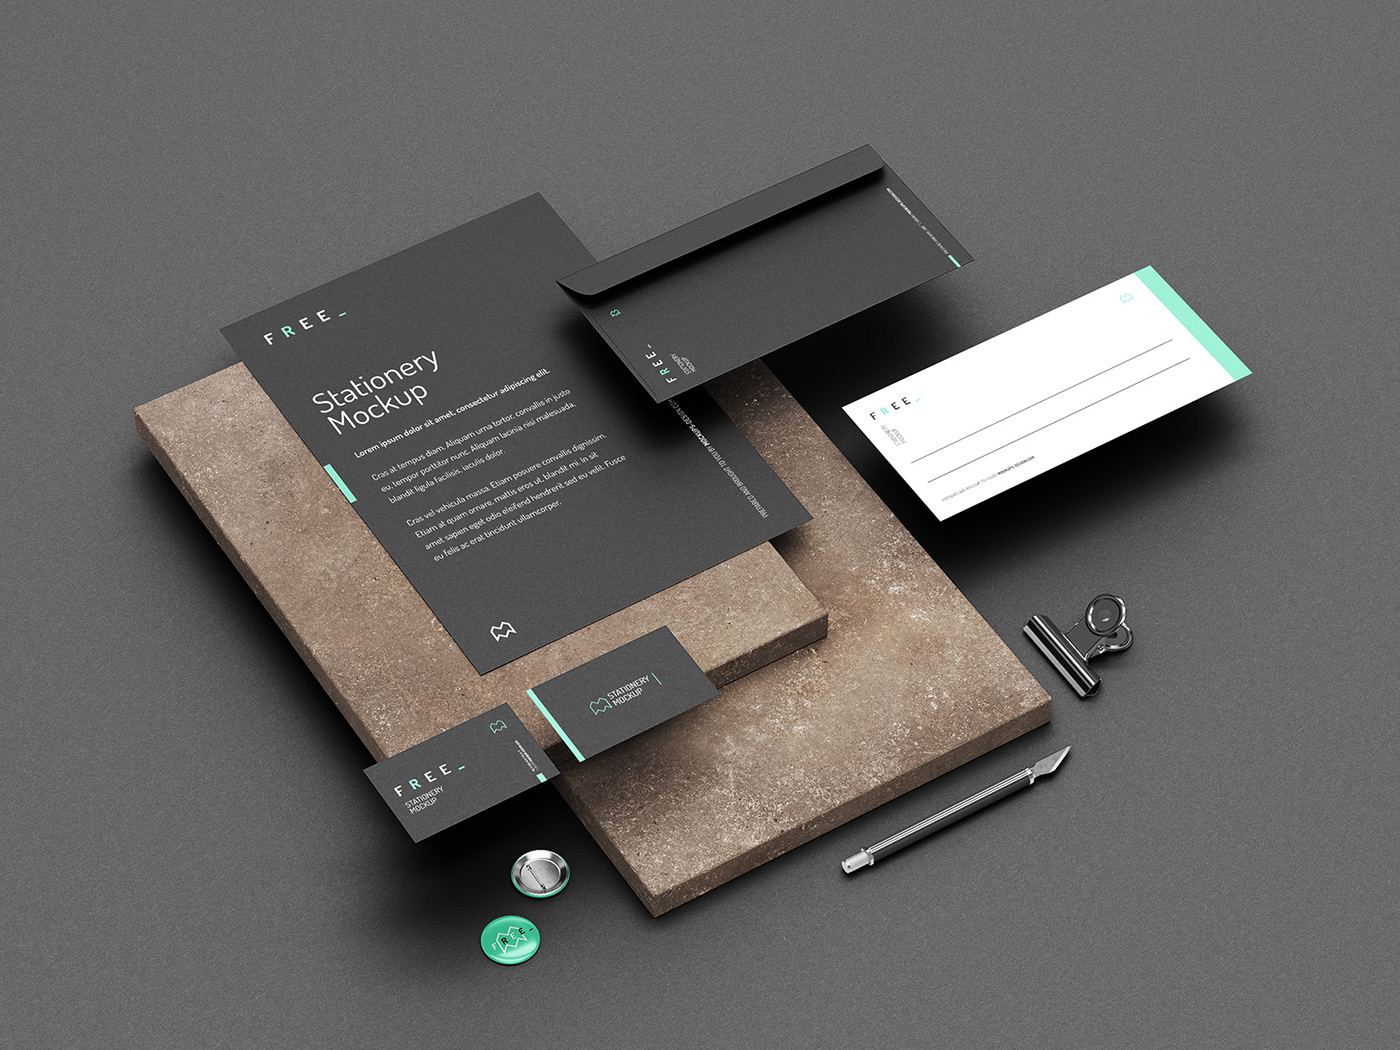 Download Free stationery mockup on Behance